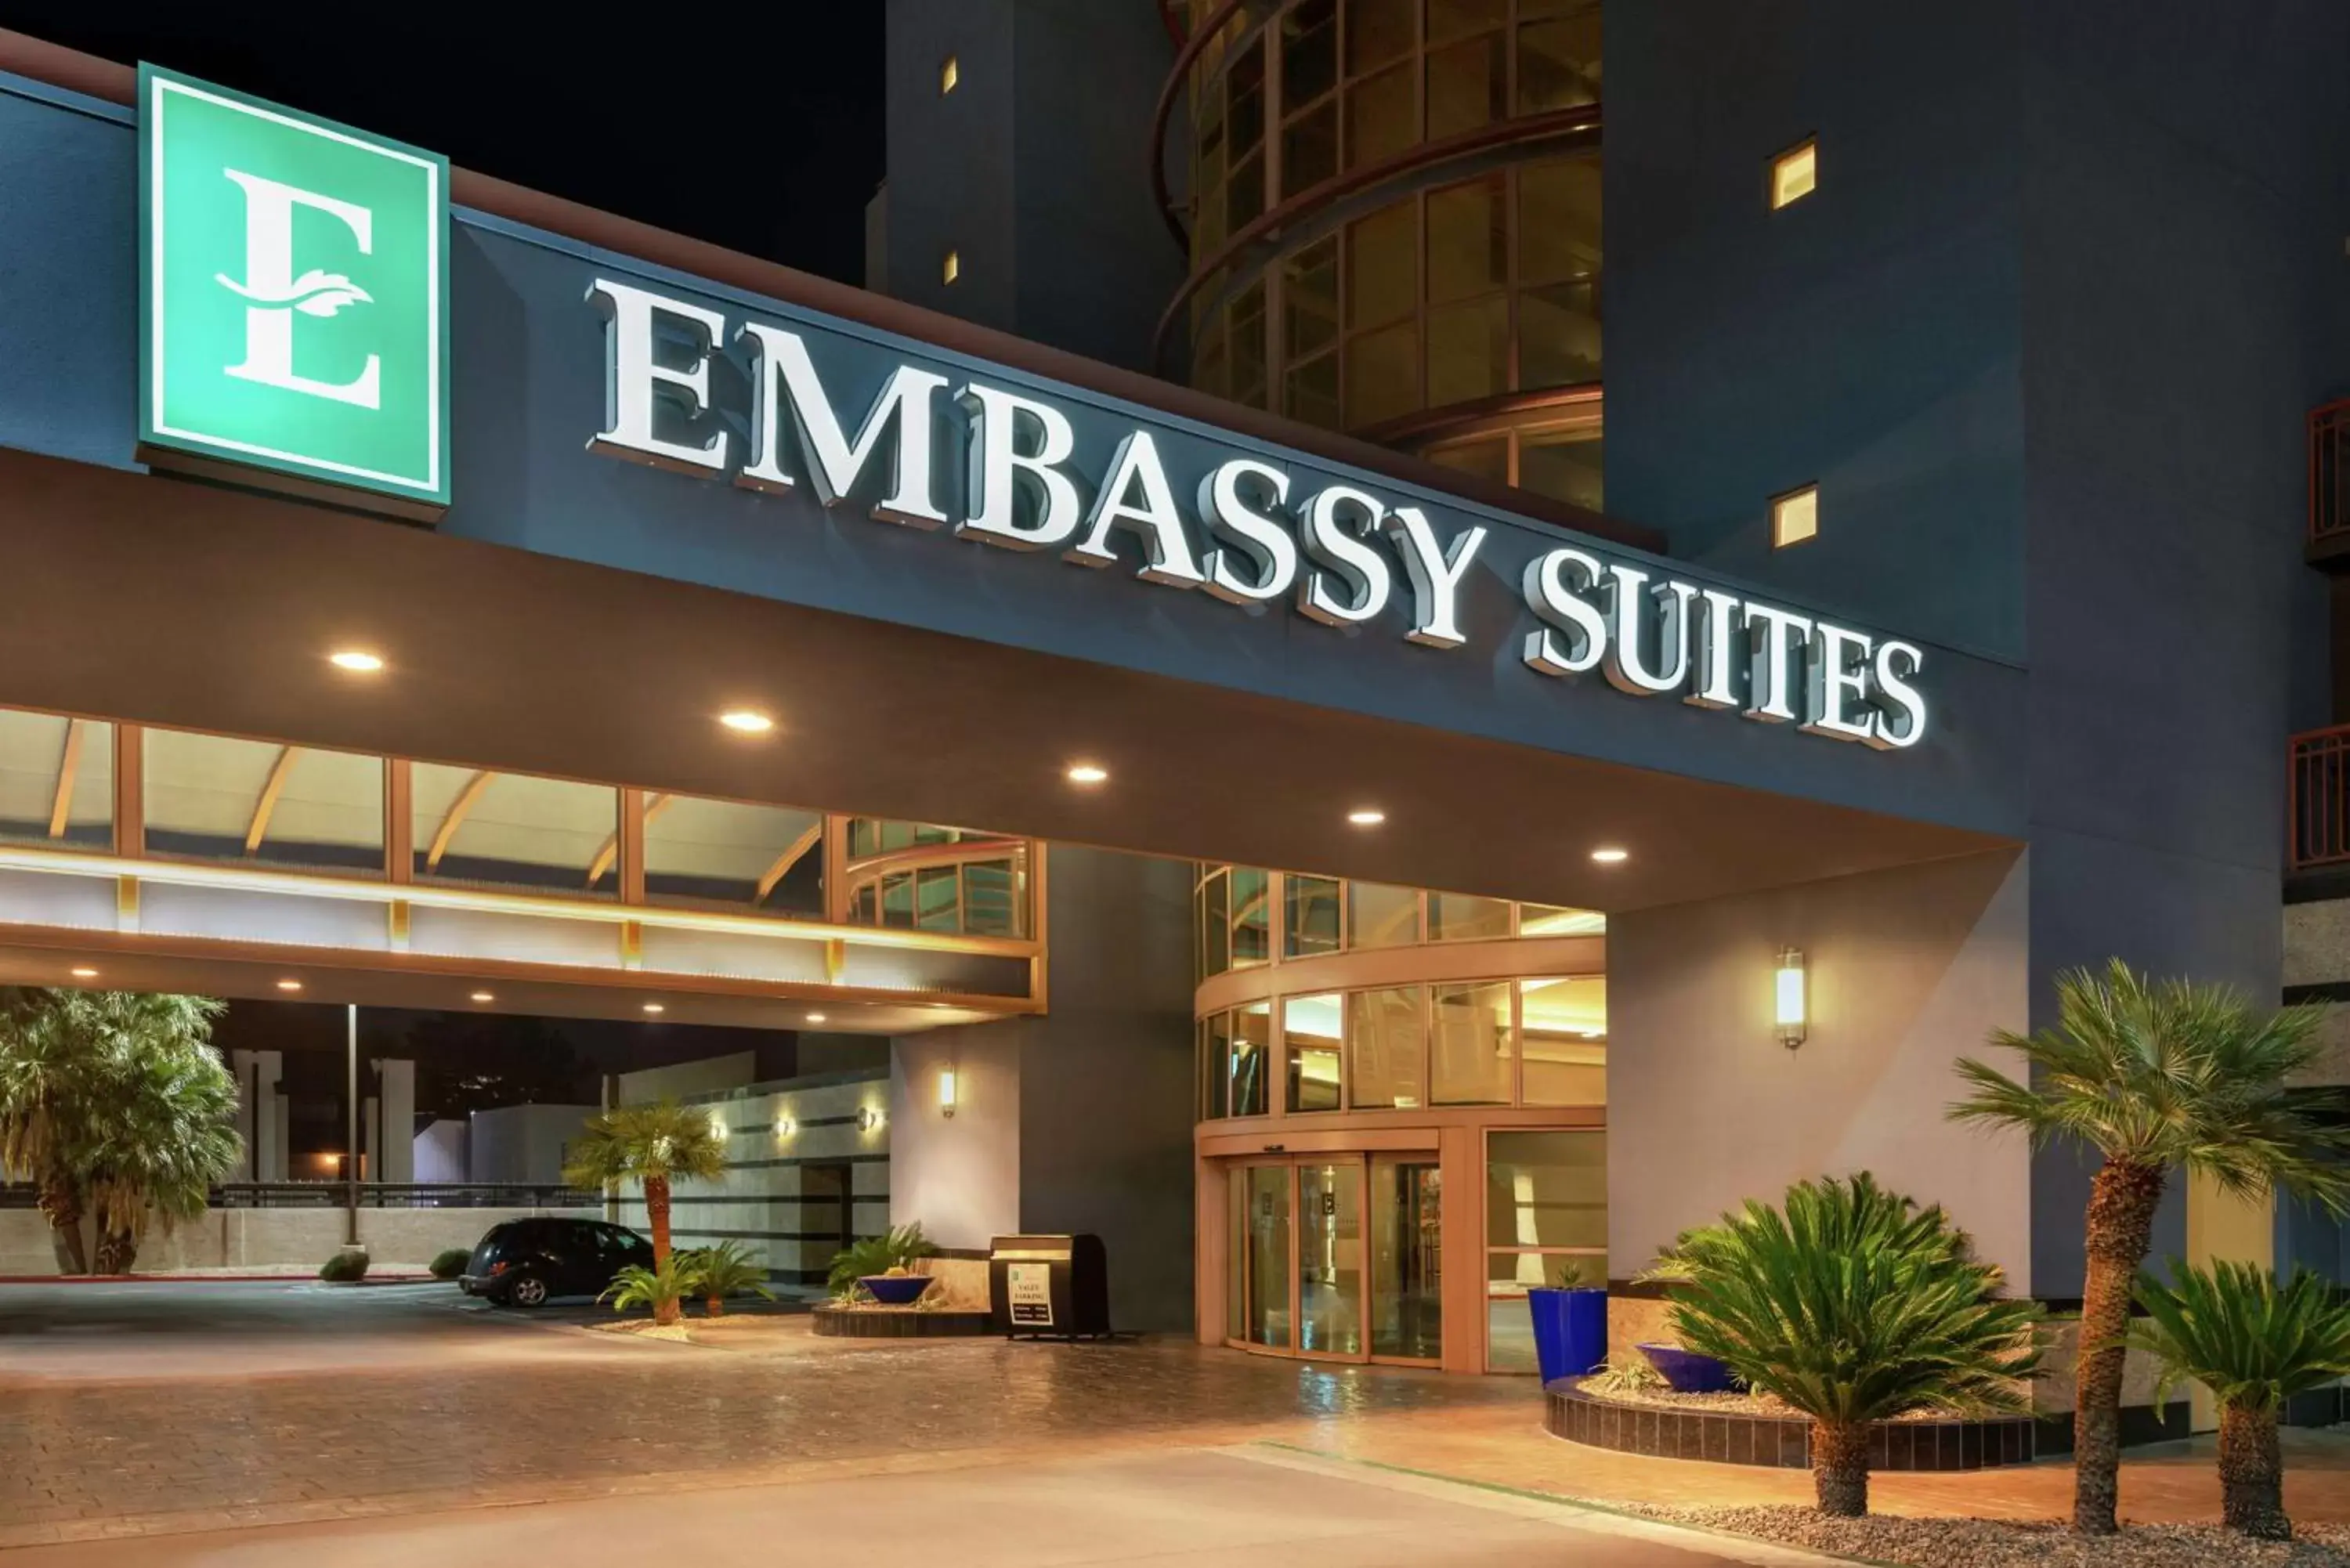 Property building in Embassy Suites by Hilton Convention Center Las Vegas